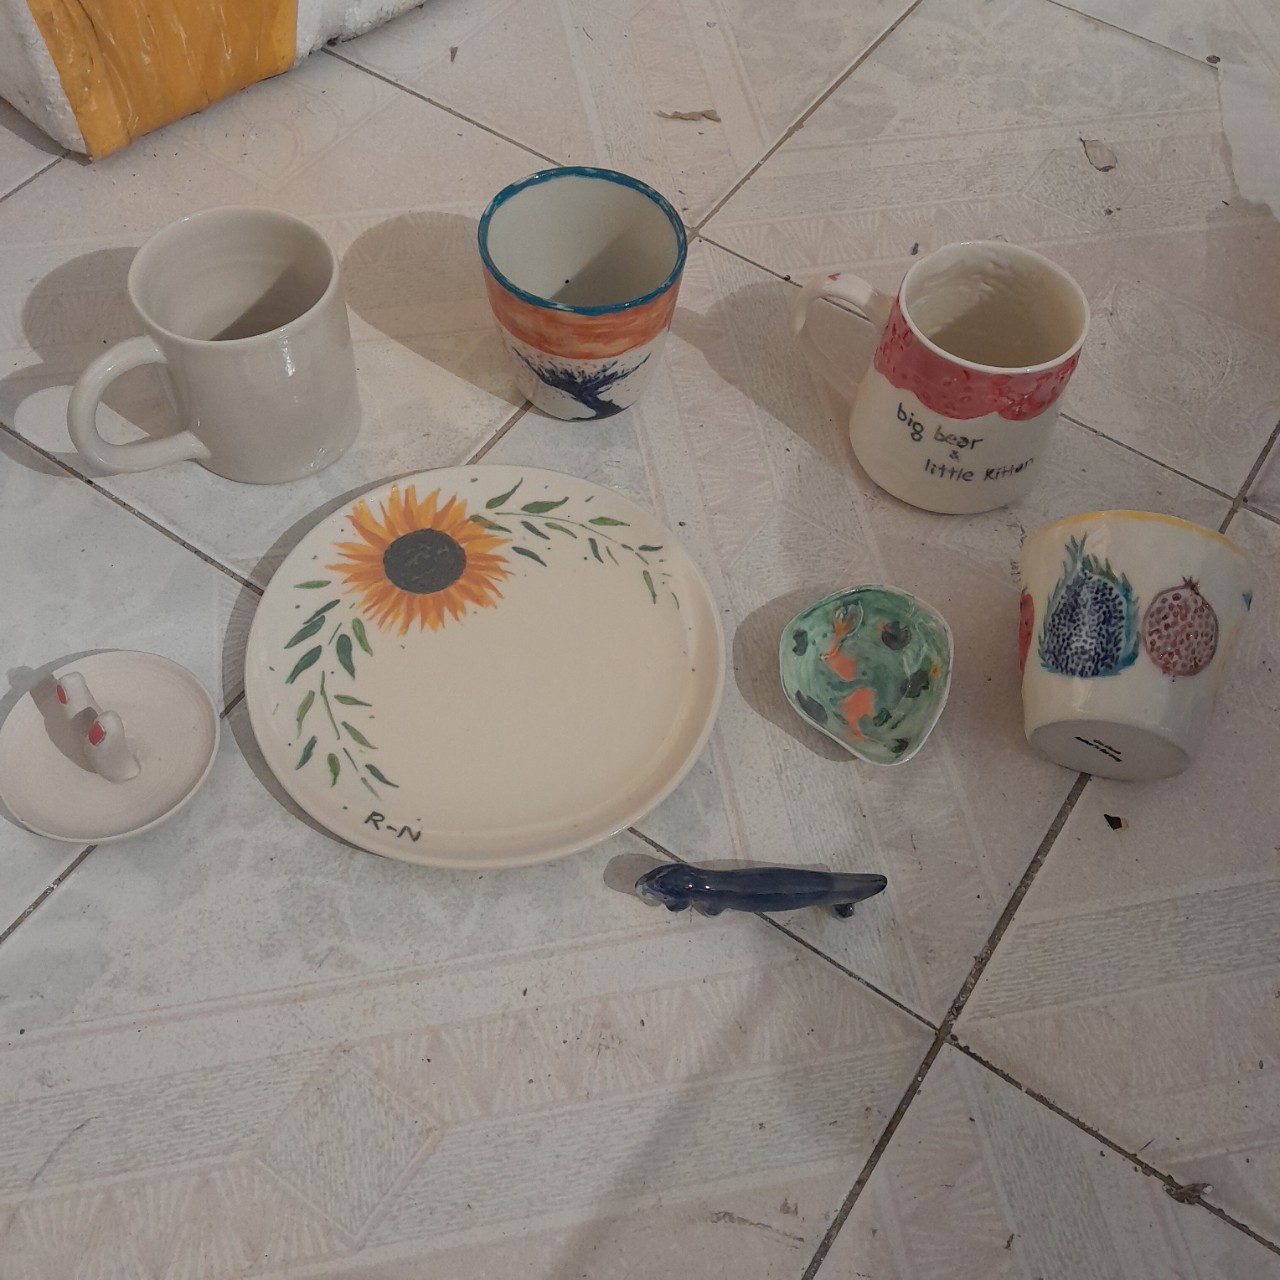 Result after ceramics painting workshop with authentic bat trang